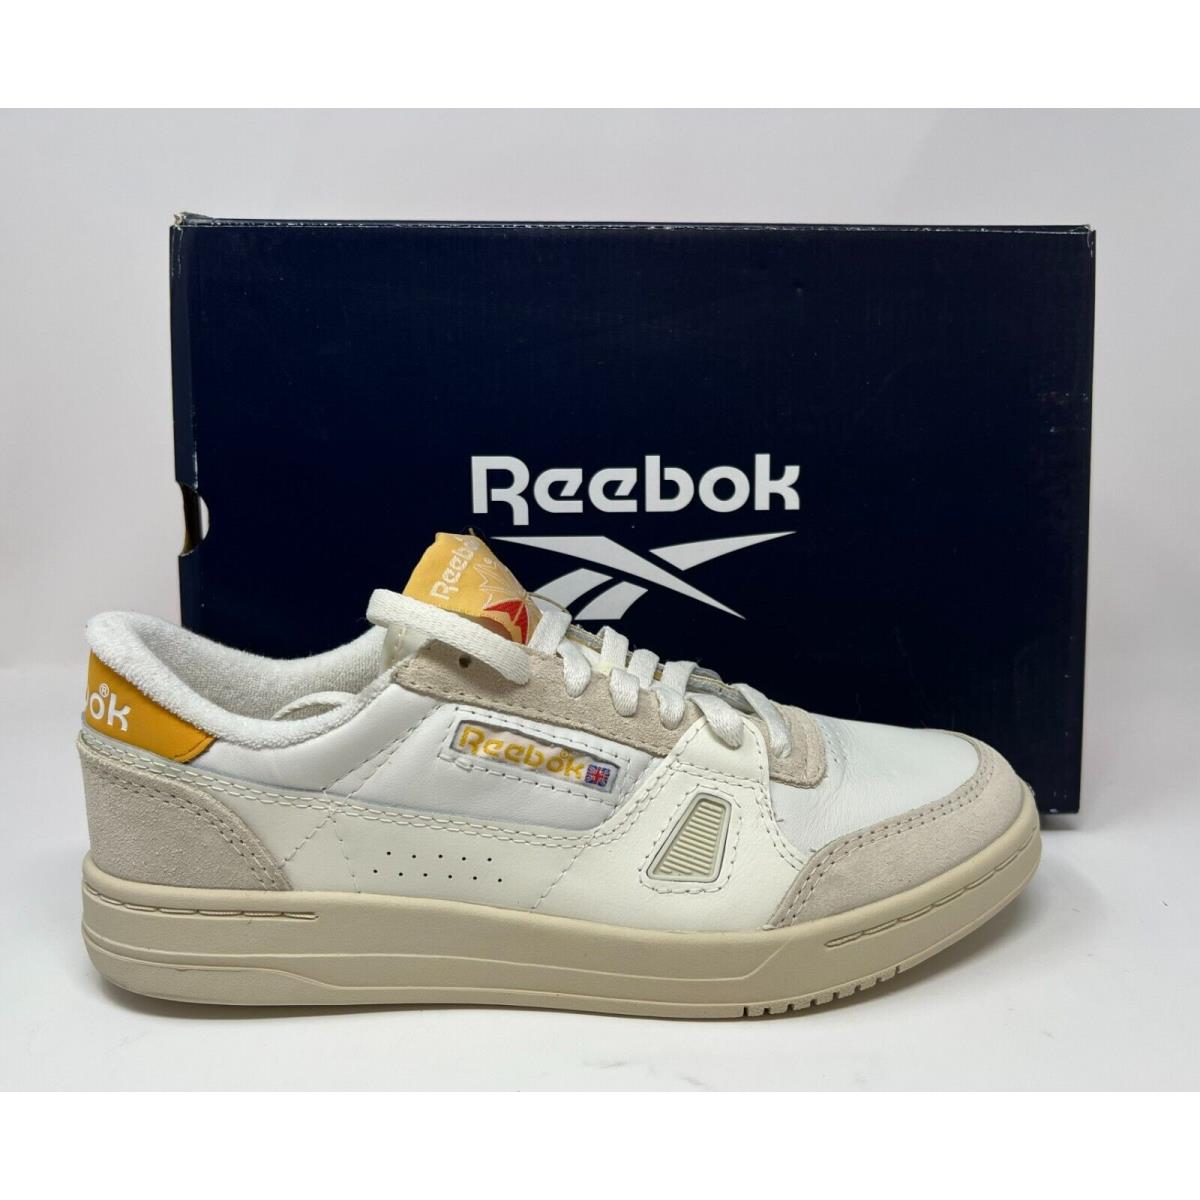 Reebok Men`s LT Court Bright Ochre Shoes GX8908 For Everyday/comfortable